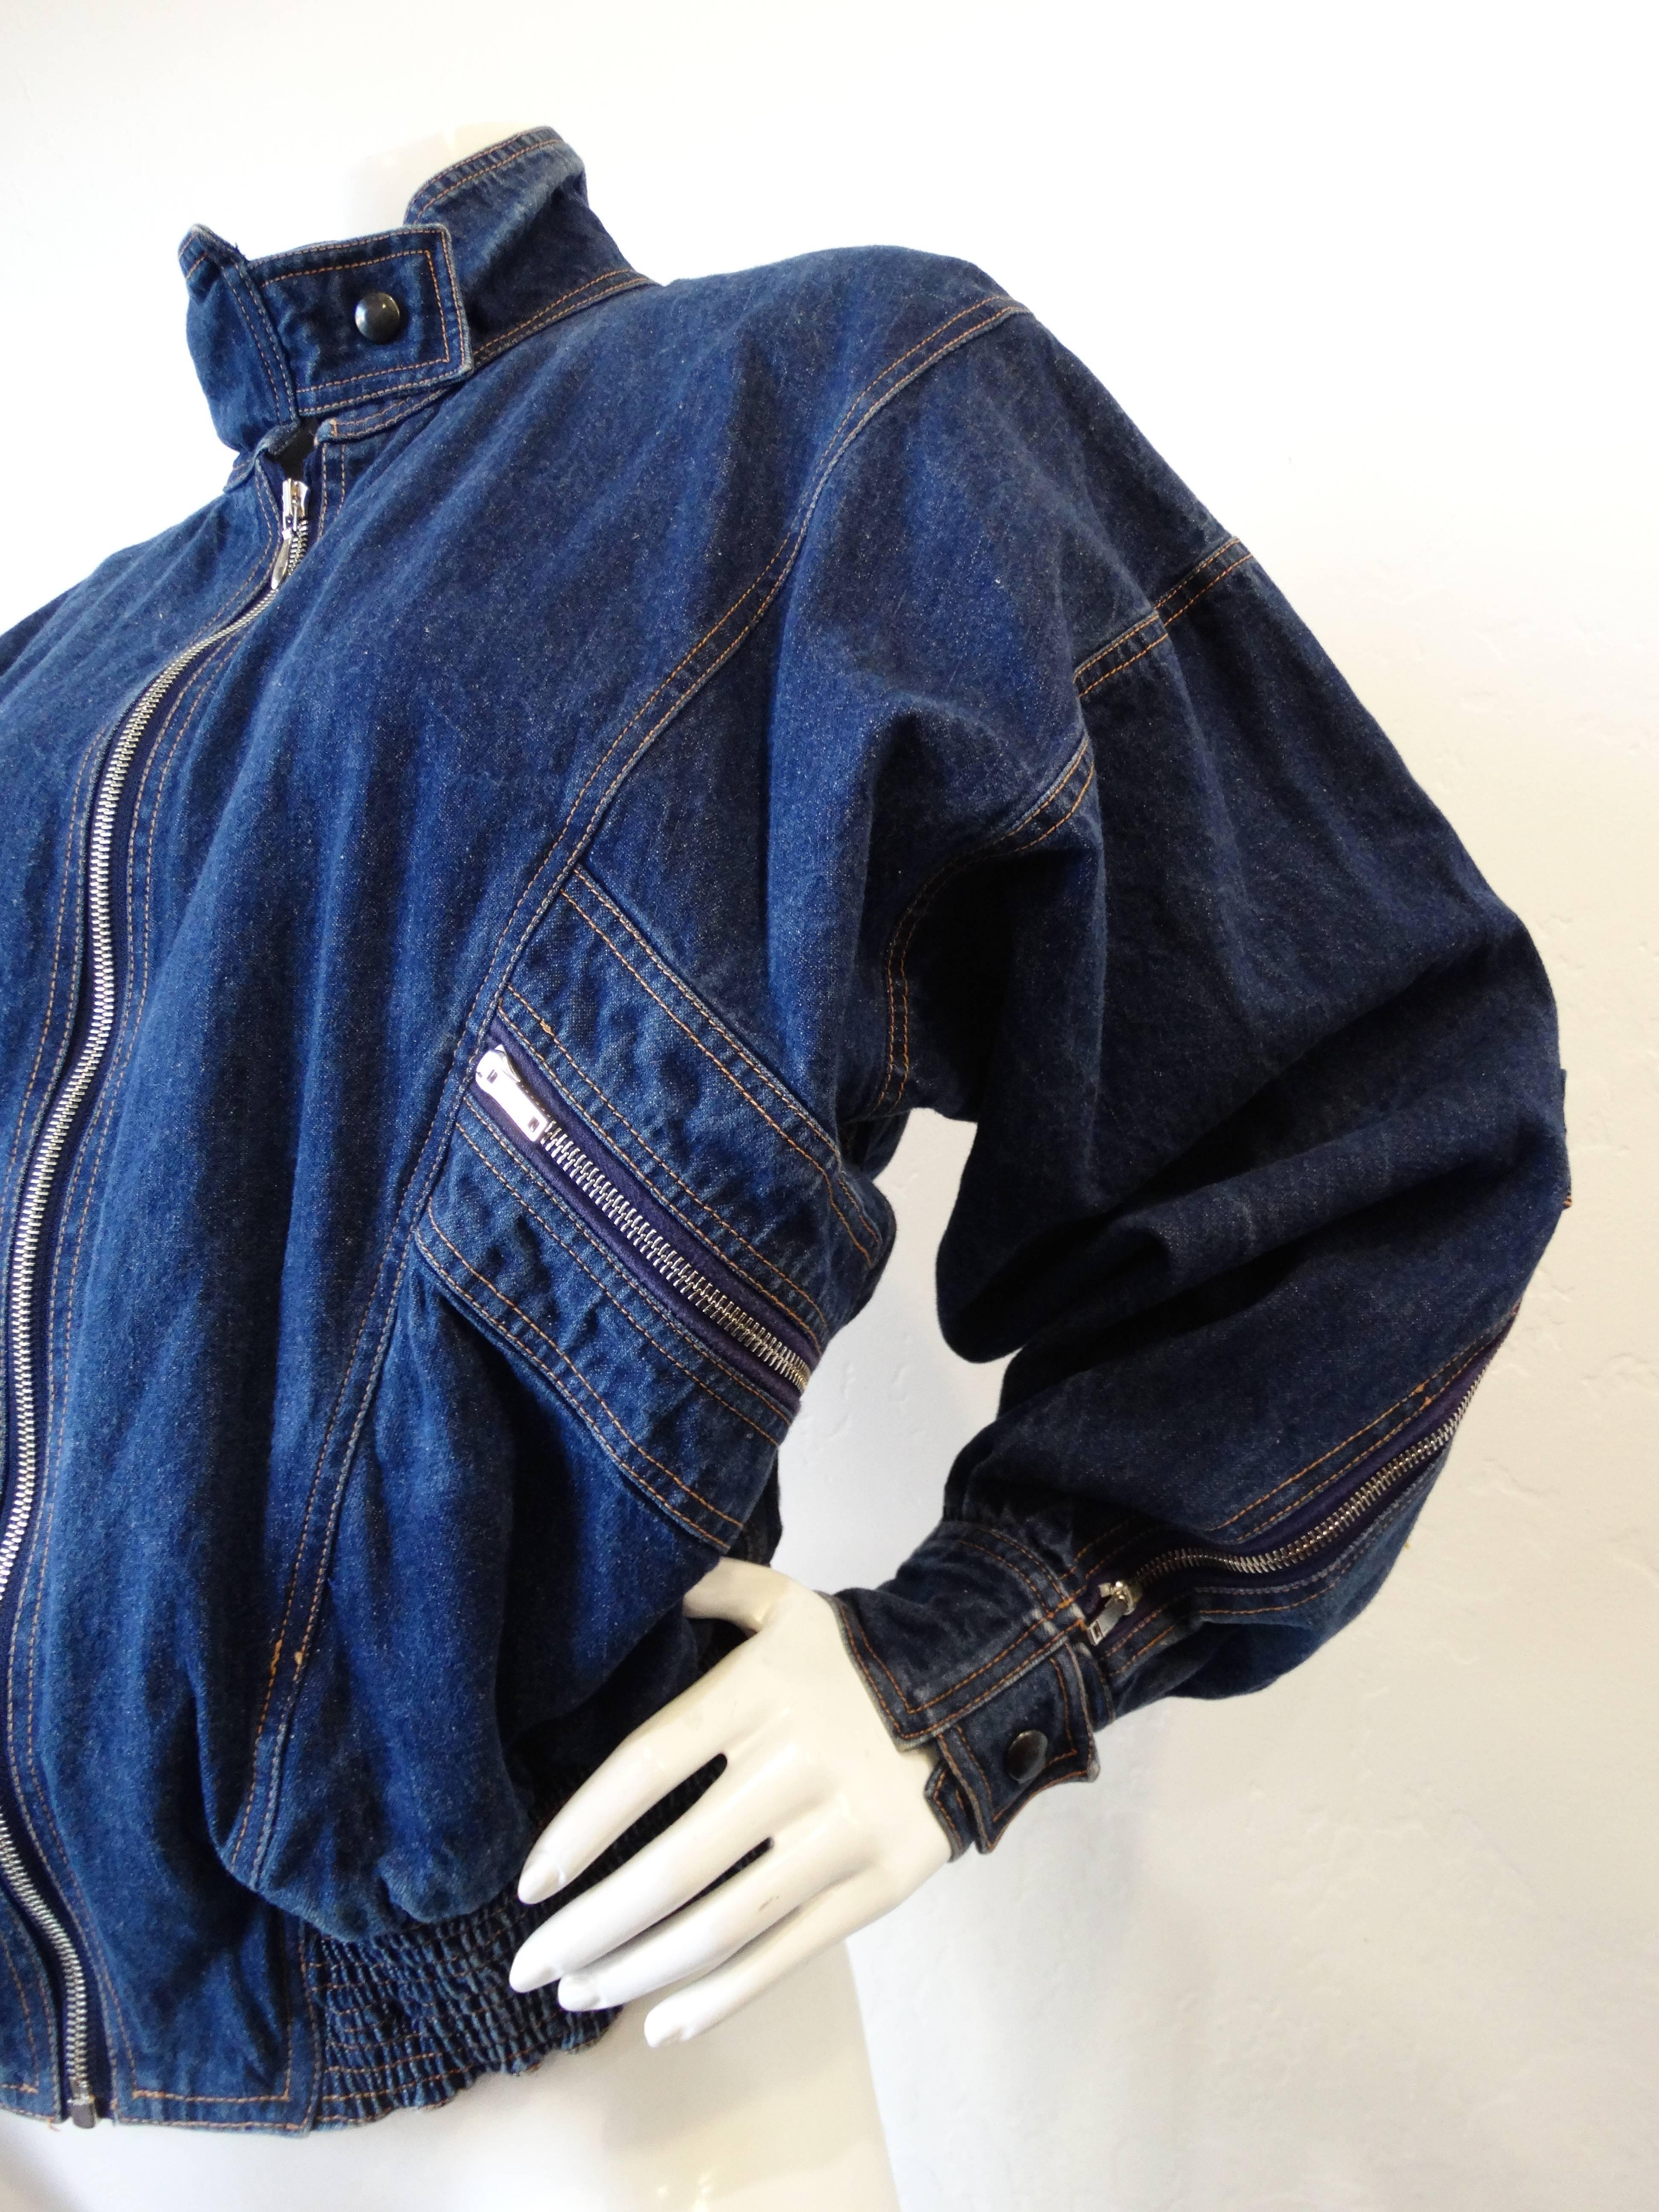 Arguably our favorite 1980s trend- the bomber jacket! This amazing denim jacket was designed by Amsterdam designer, Fong Leng! Made of a soft true blue denim with contrasting yellow stitching throughout. Classic bomber fit with oversized sleeves,